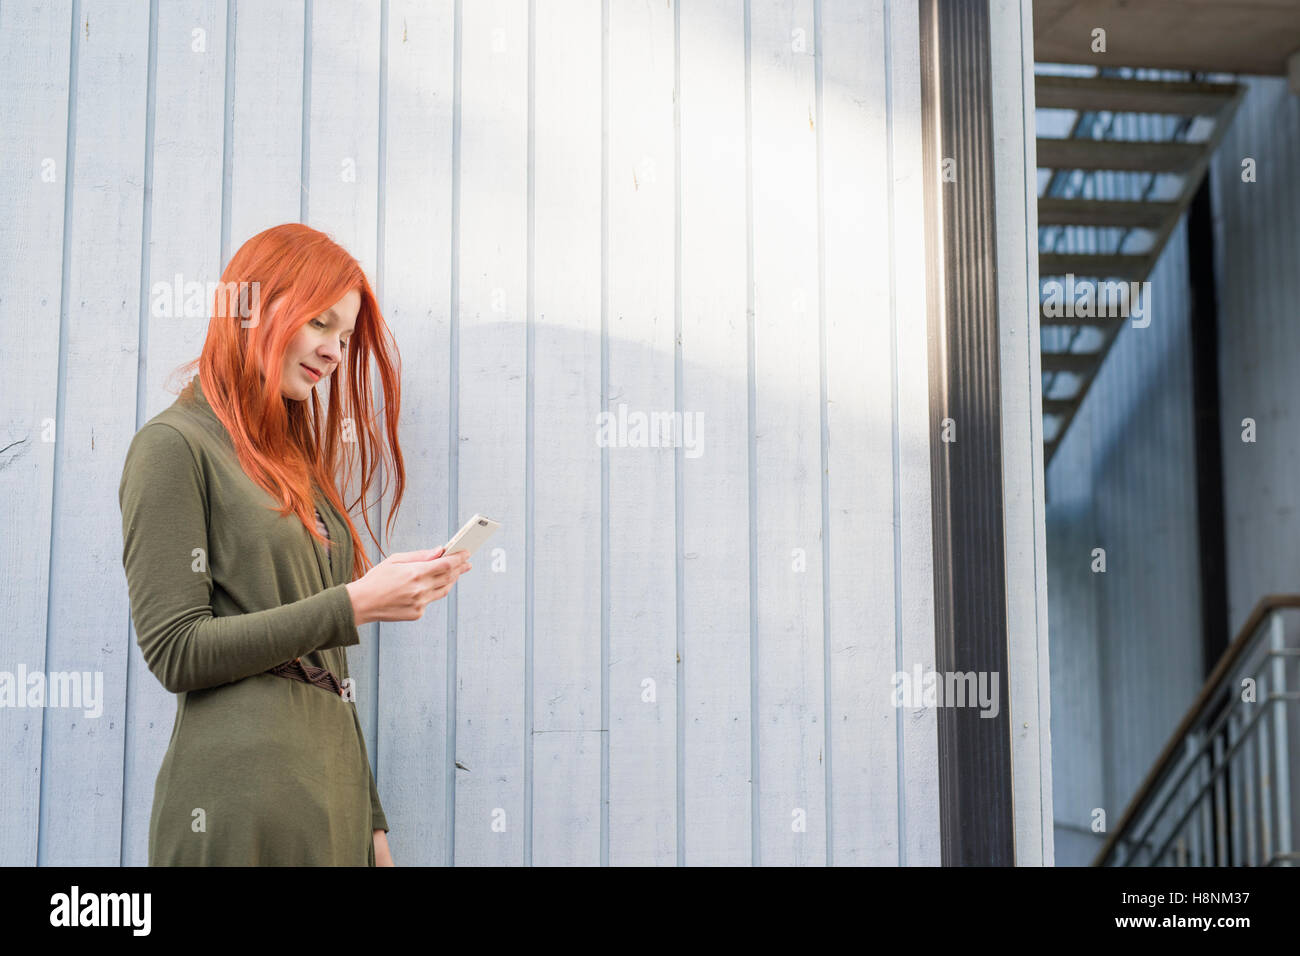 Redhaired woman using phone against white wall Stock Photo